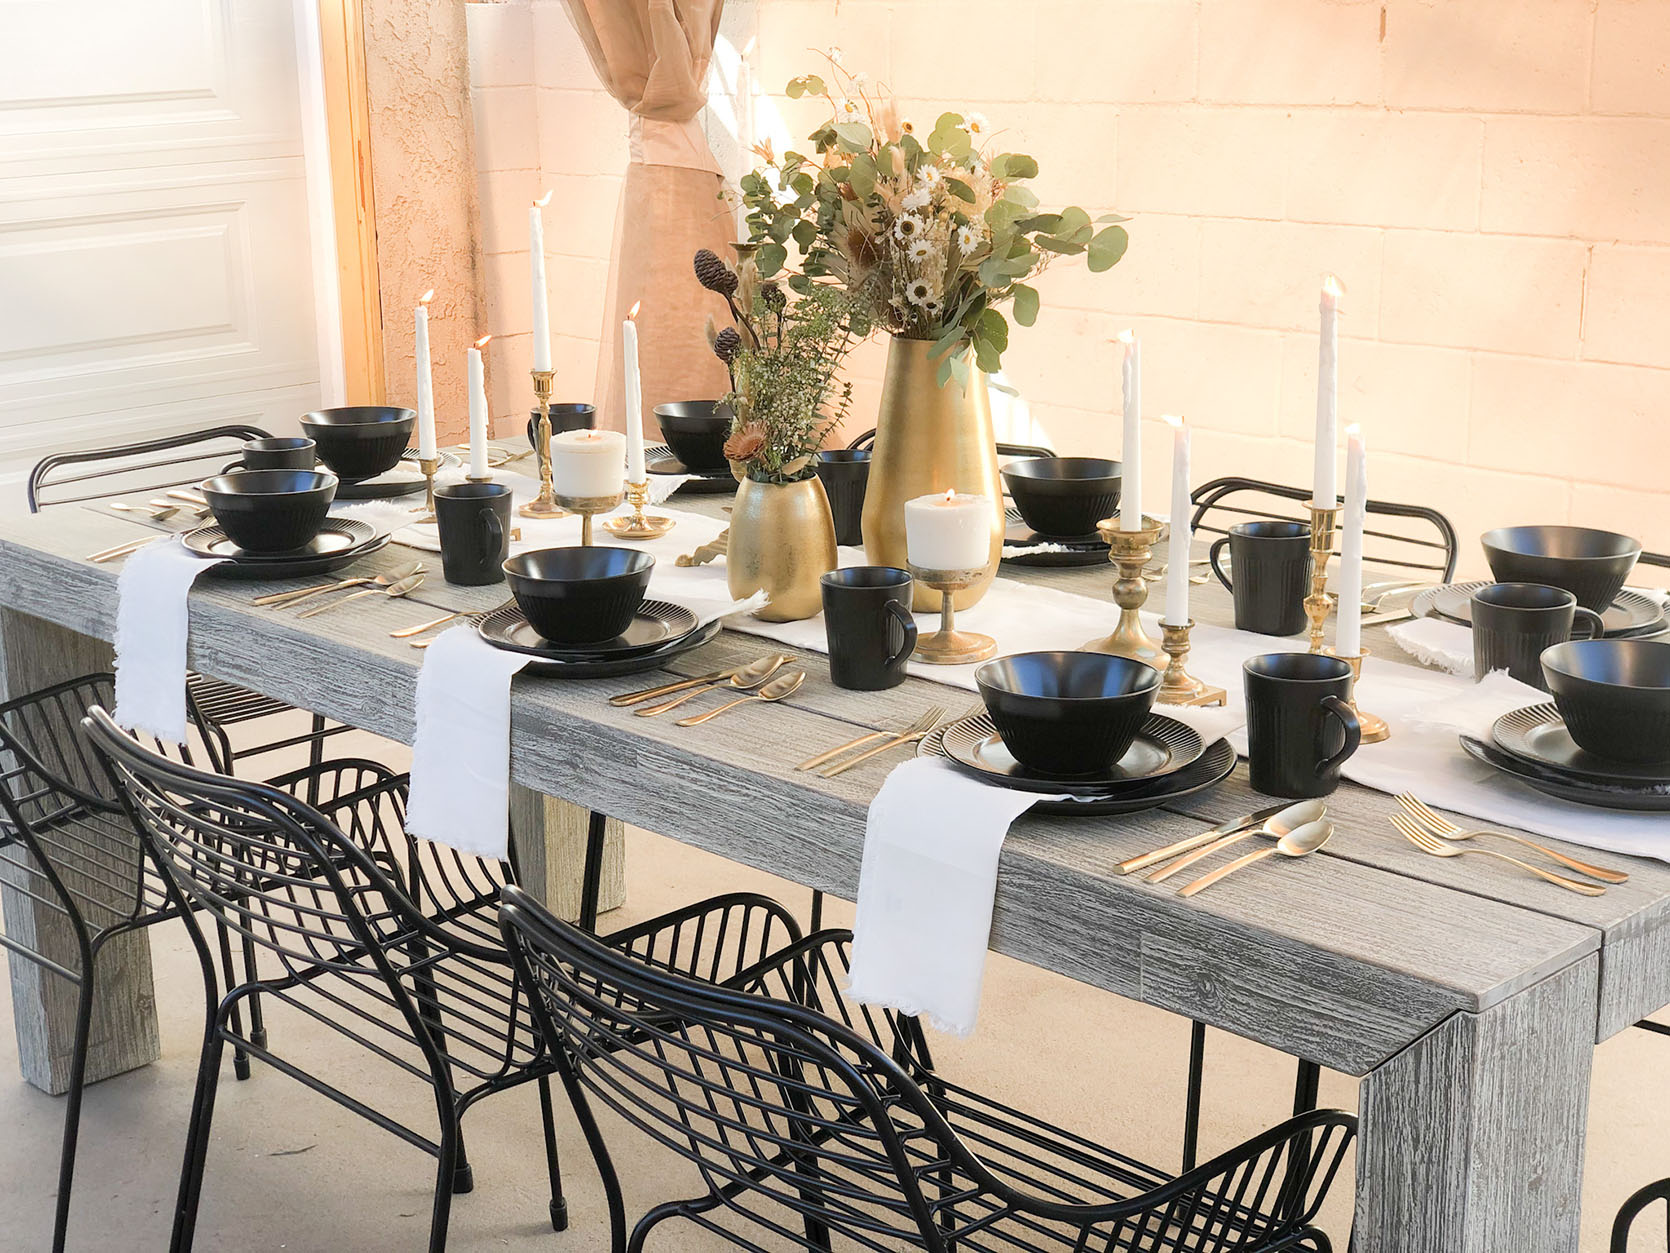 Ajai Gave Her Parent'S Patio A Major Facelift Just In Time For Thanksgiving (And Her Due Date)